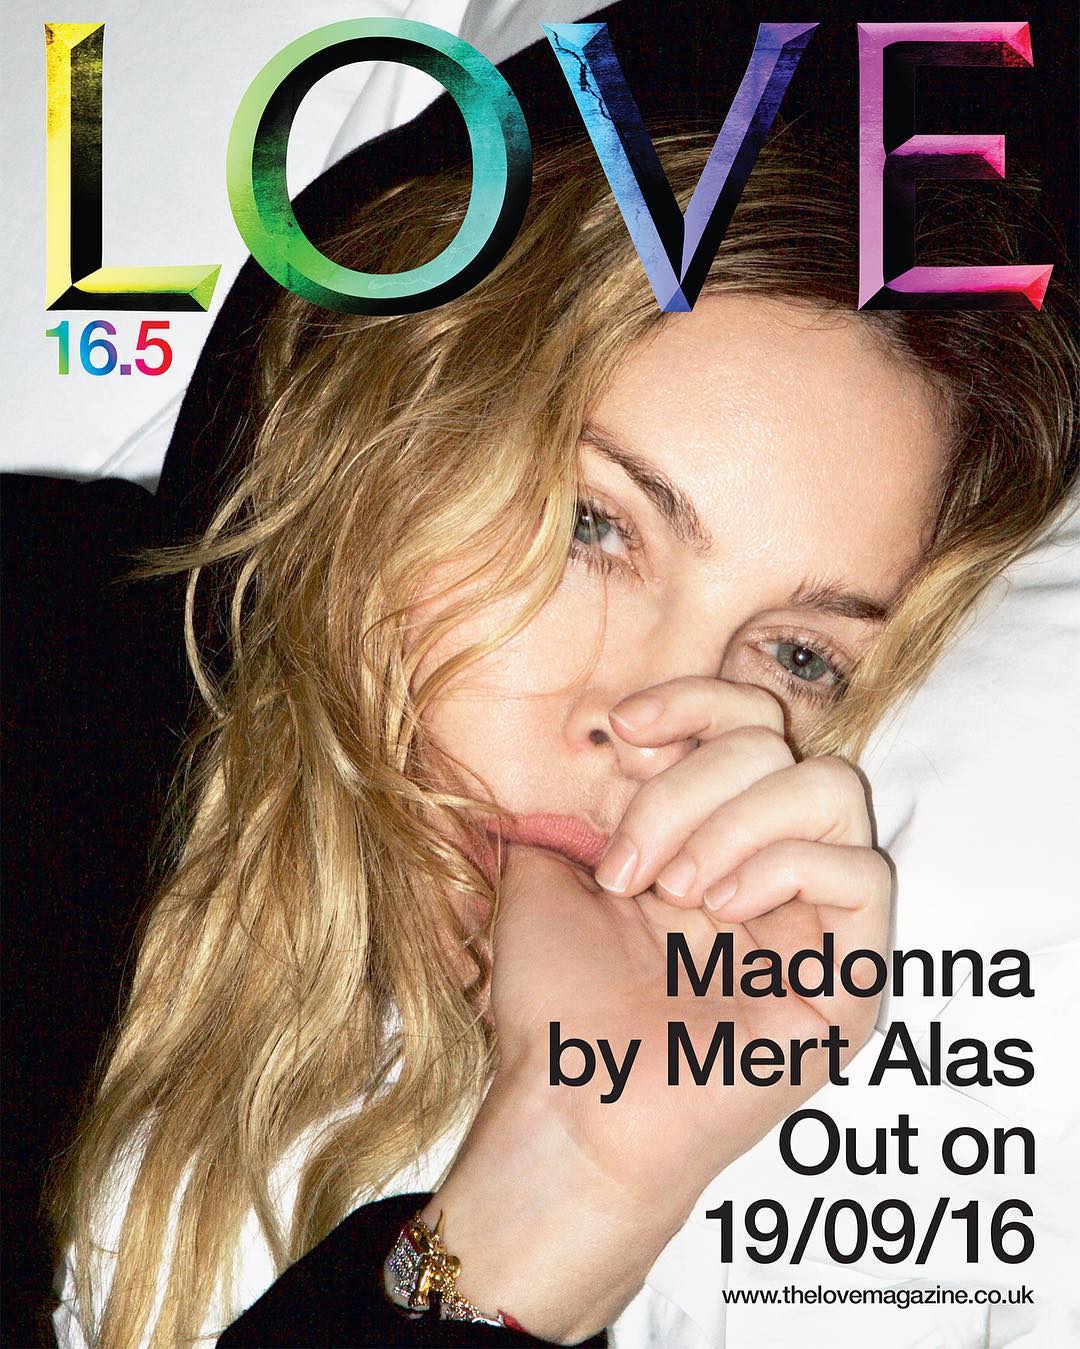 Madonna by Mert Alas on the cover of Love 16.5